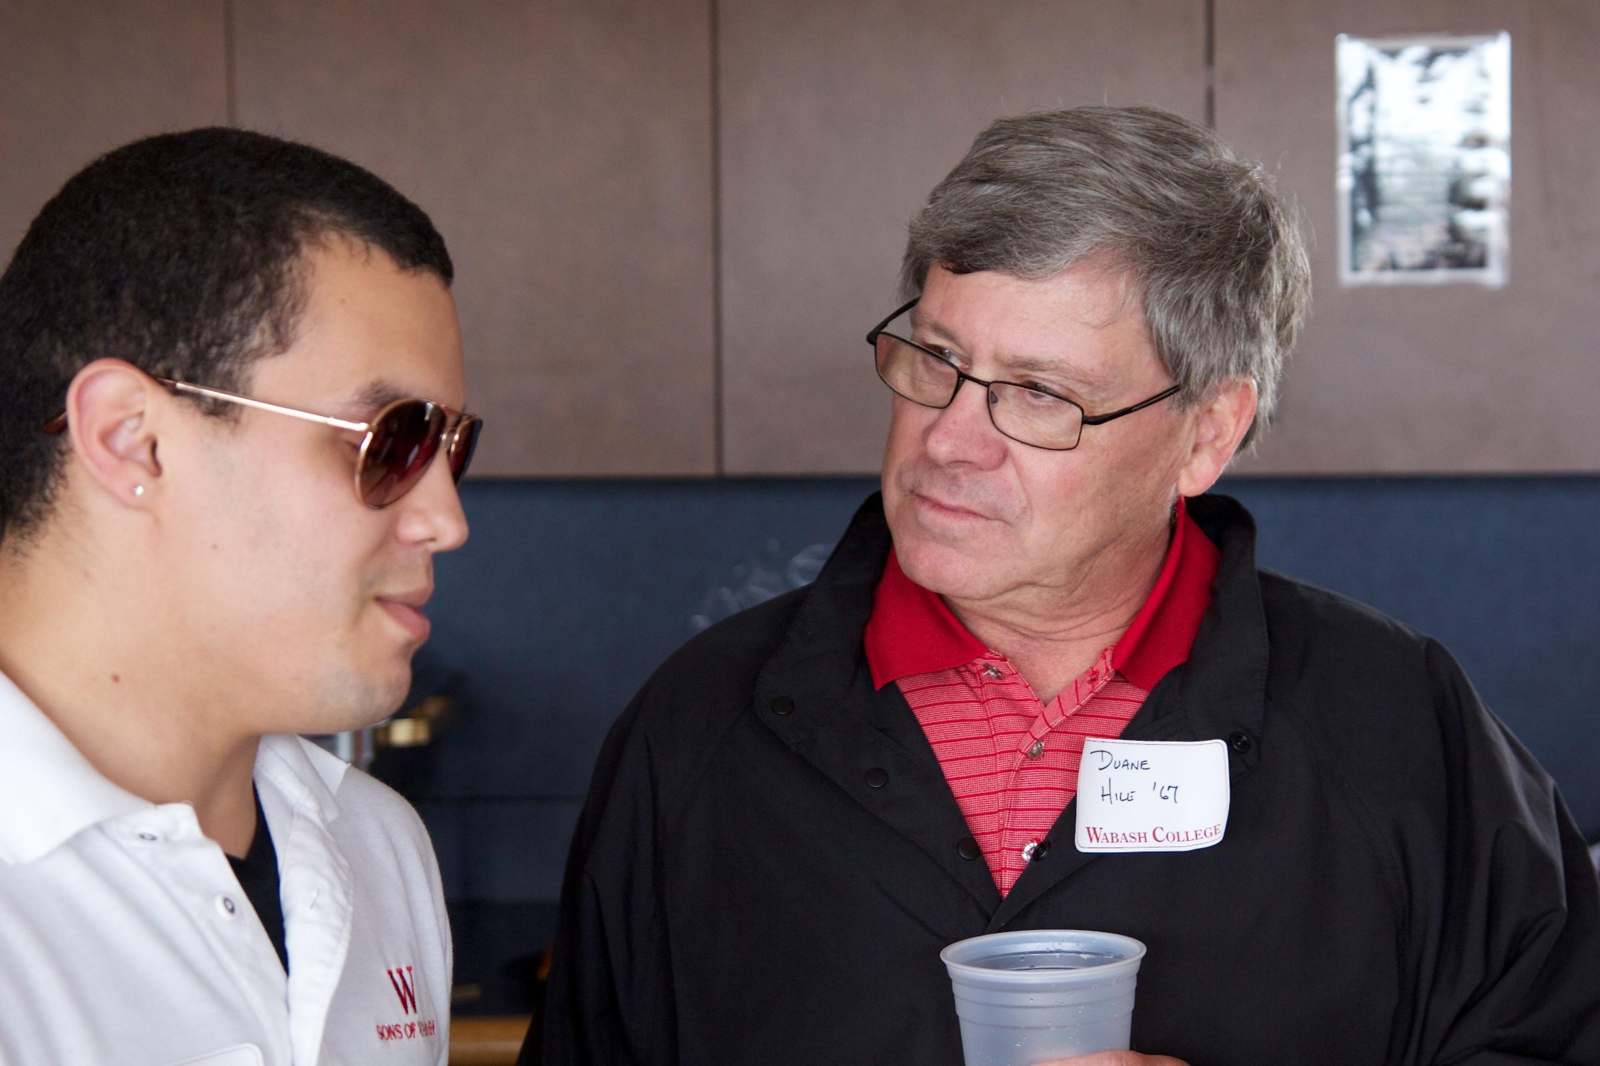 a man wearing glasses and a name tag talking to a man